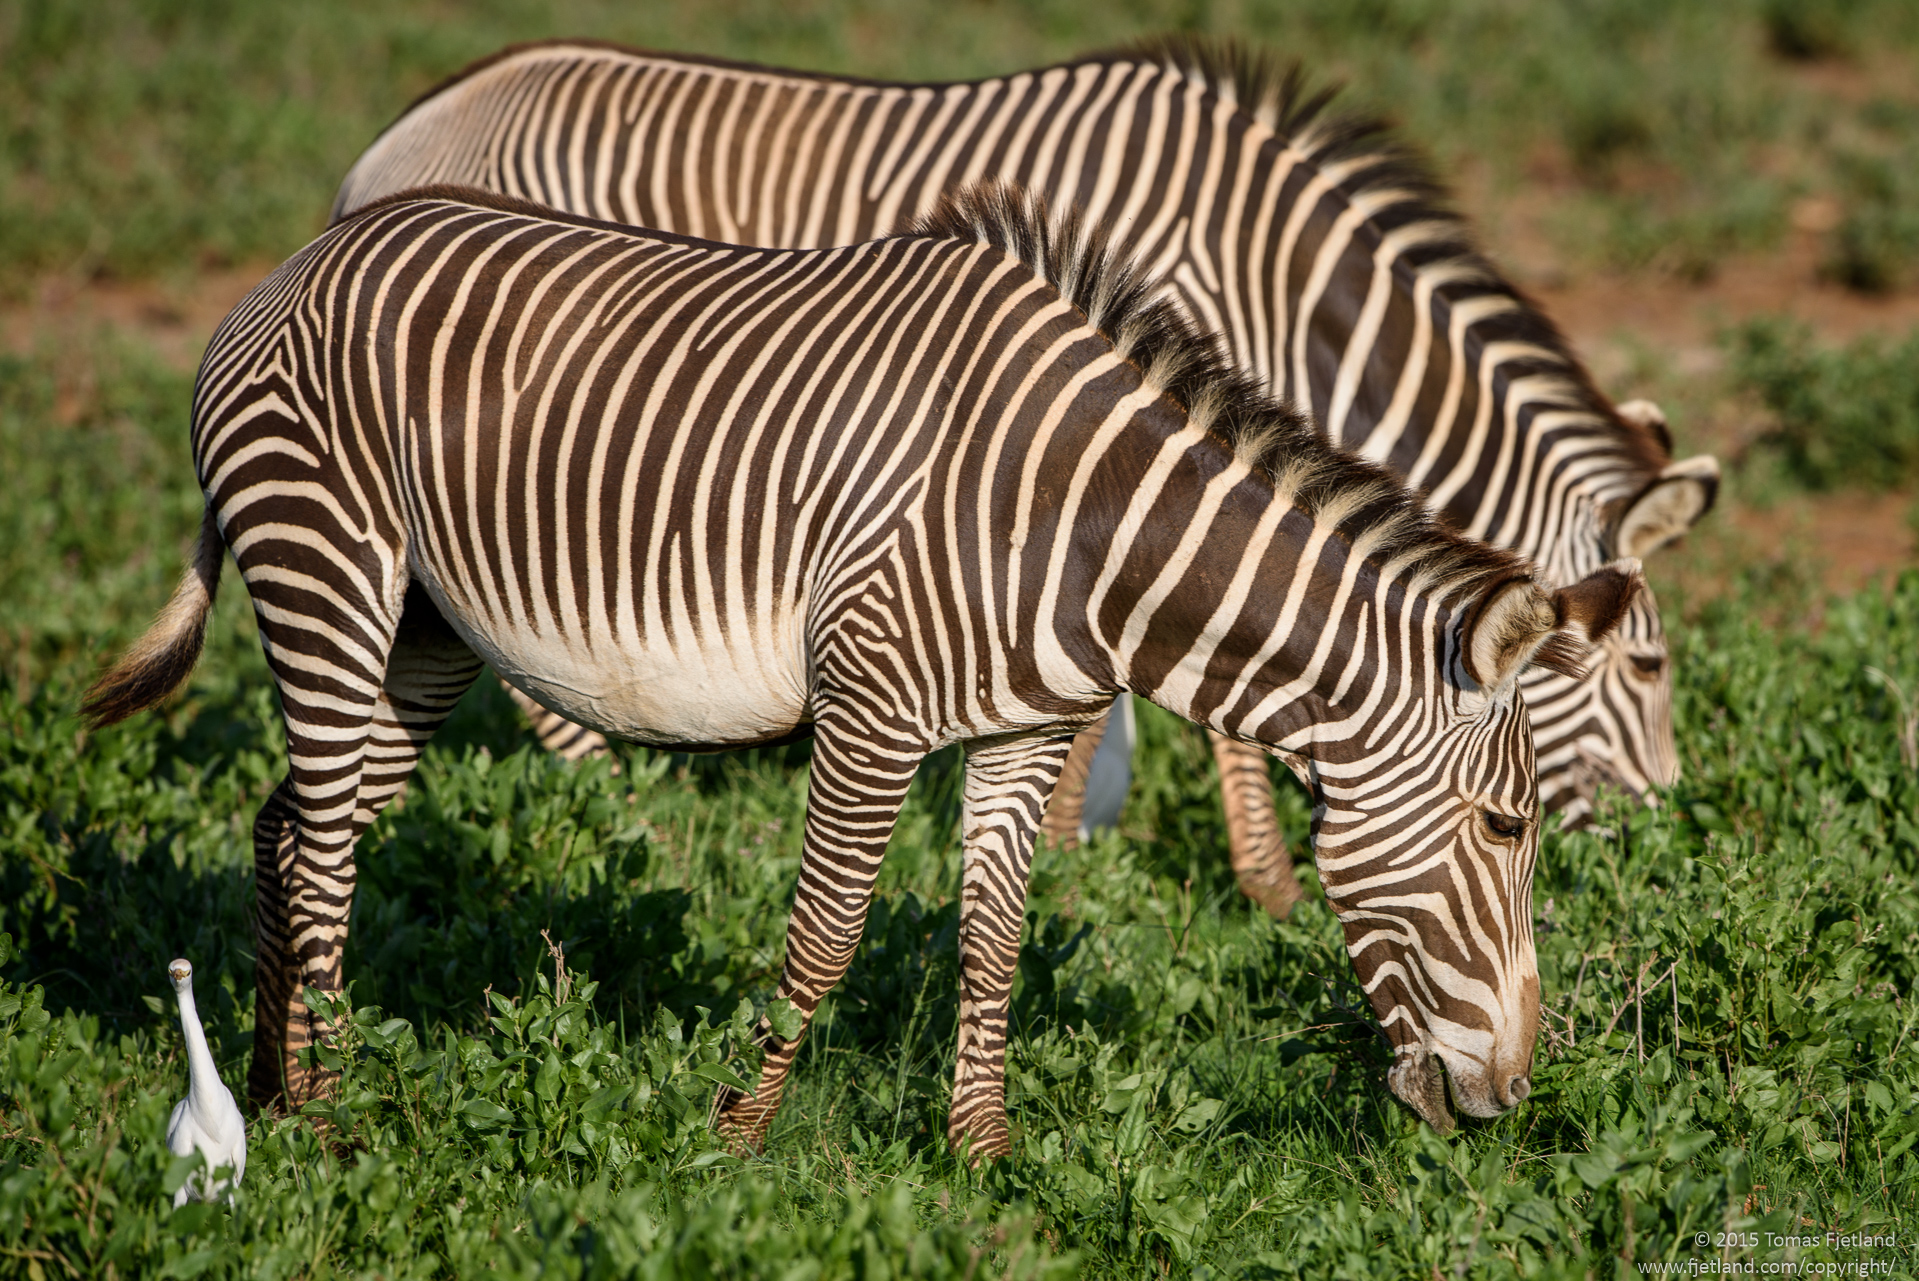 A pair of Grévys Zebras. Notice the denser stripes and how the stripes don't go all the way down and under the belly like on "Mara" Zebras.